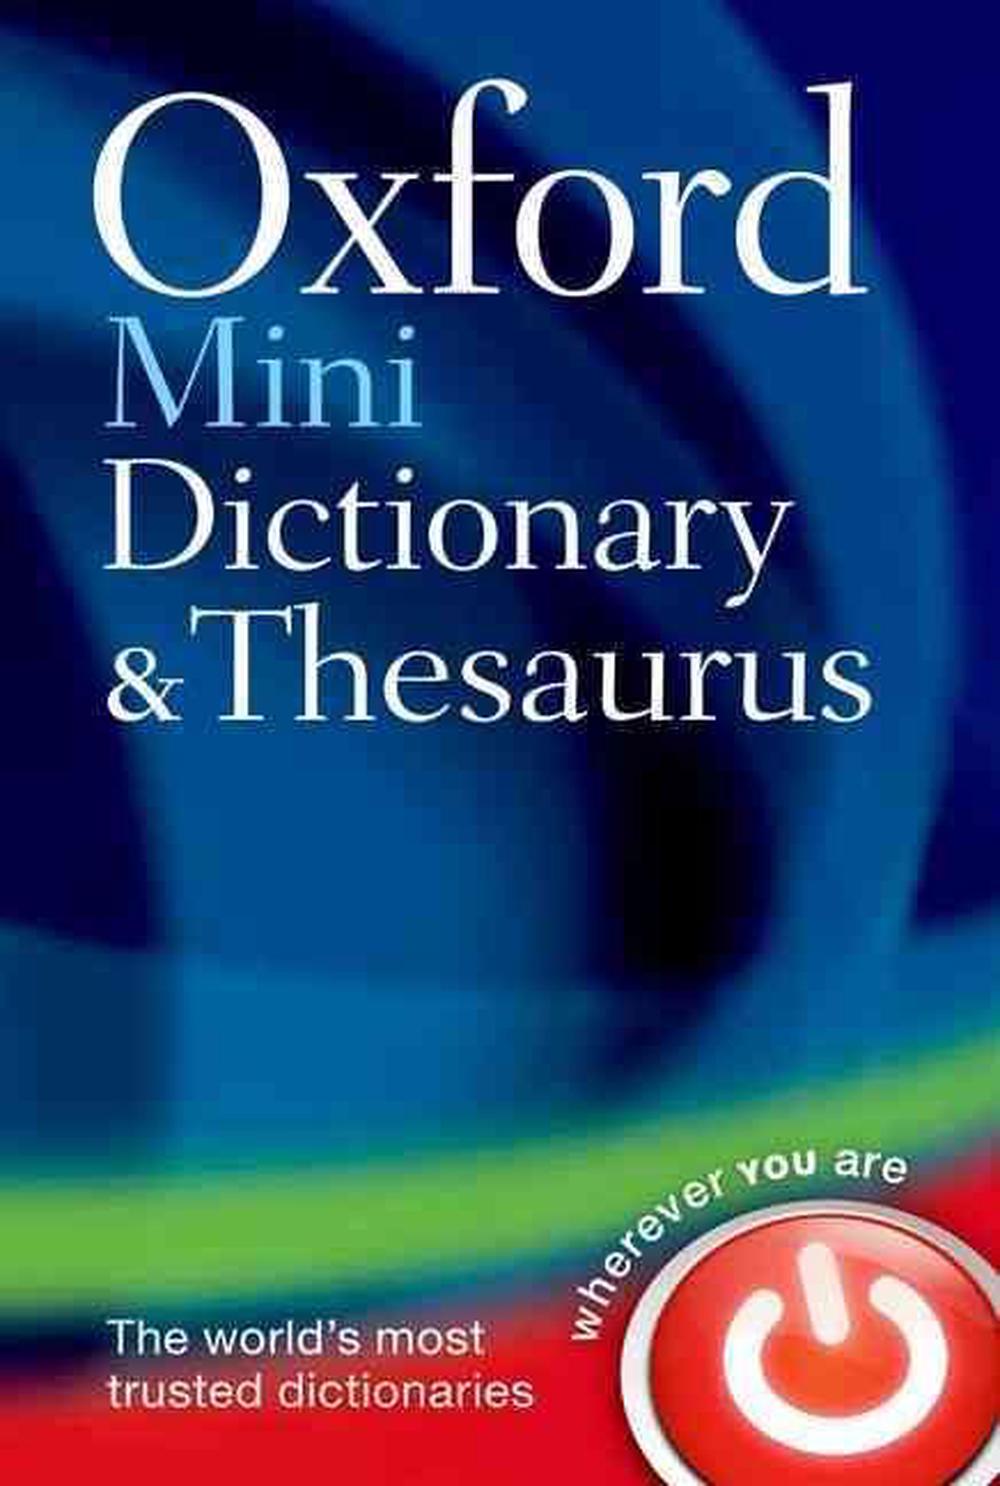 oxford-mini-dictionary-and-thesaurus-by-oxford-dictionaries